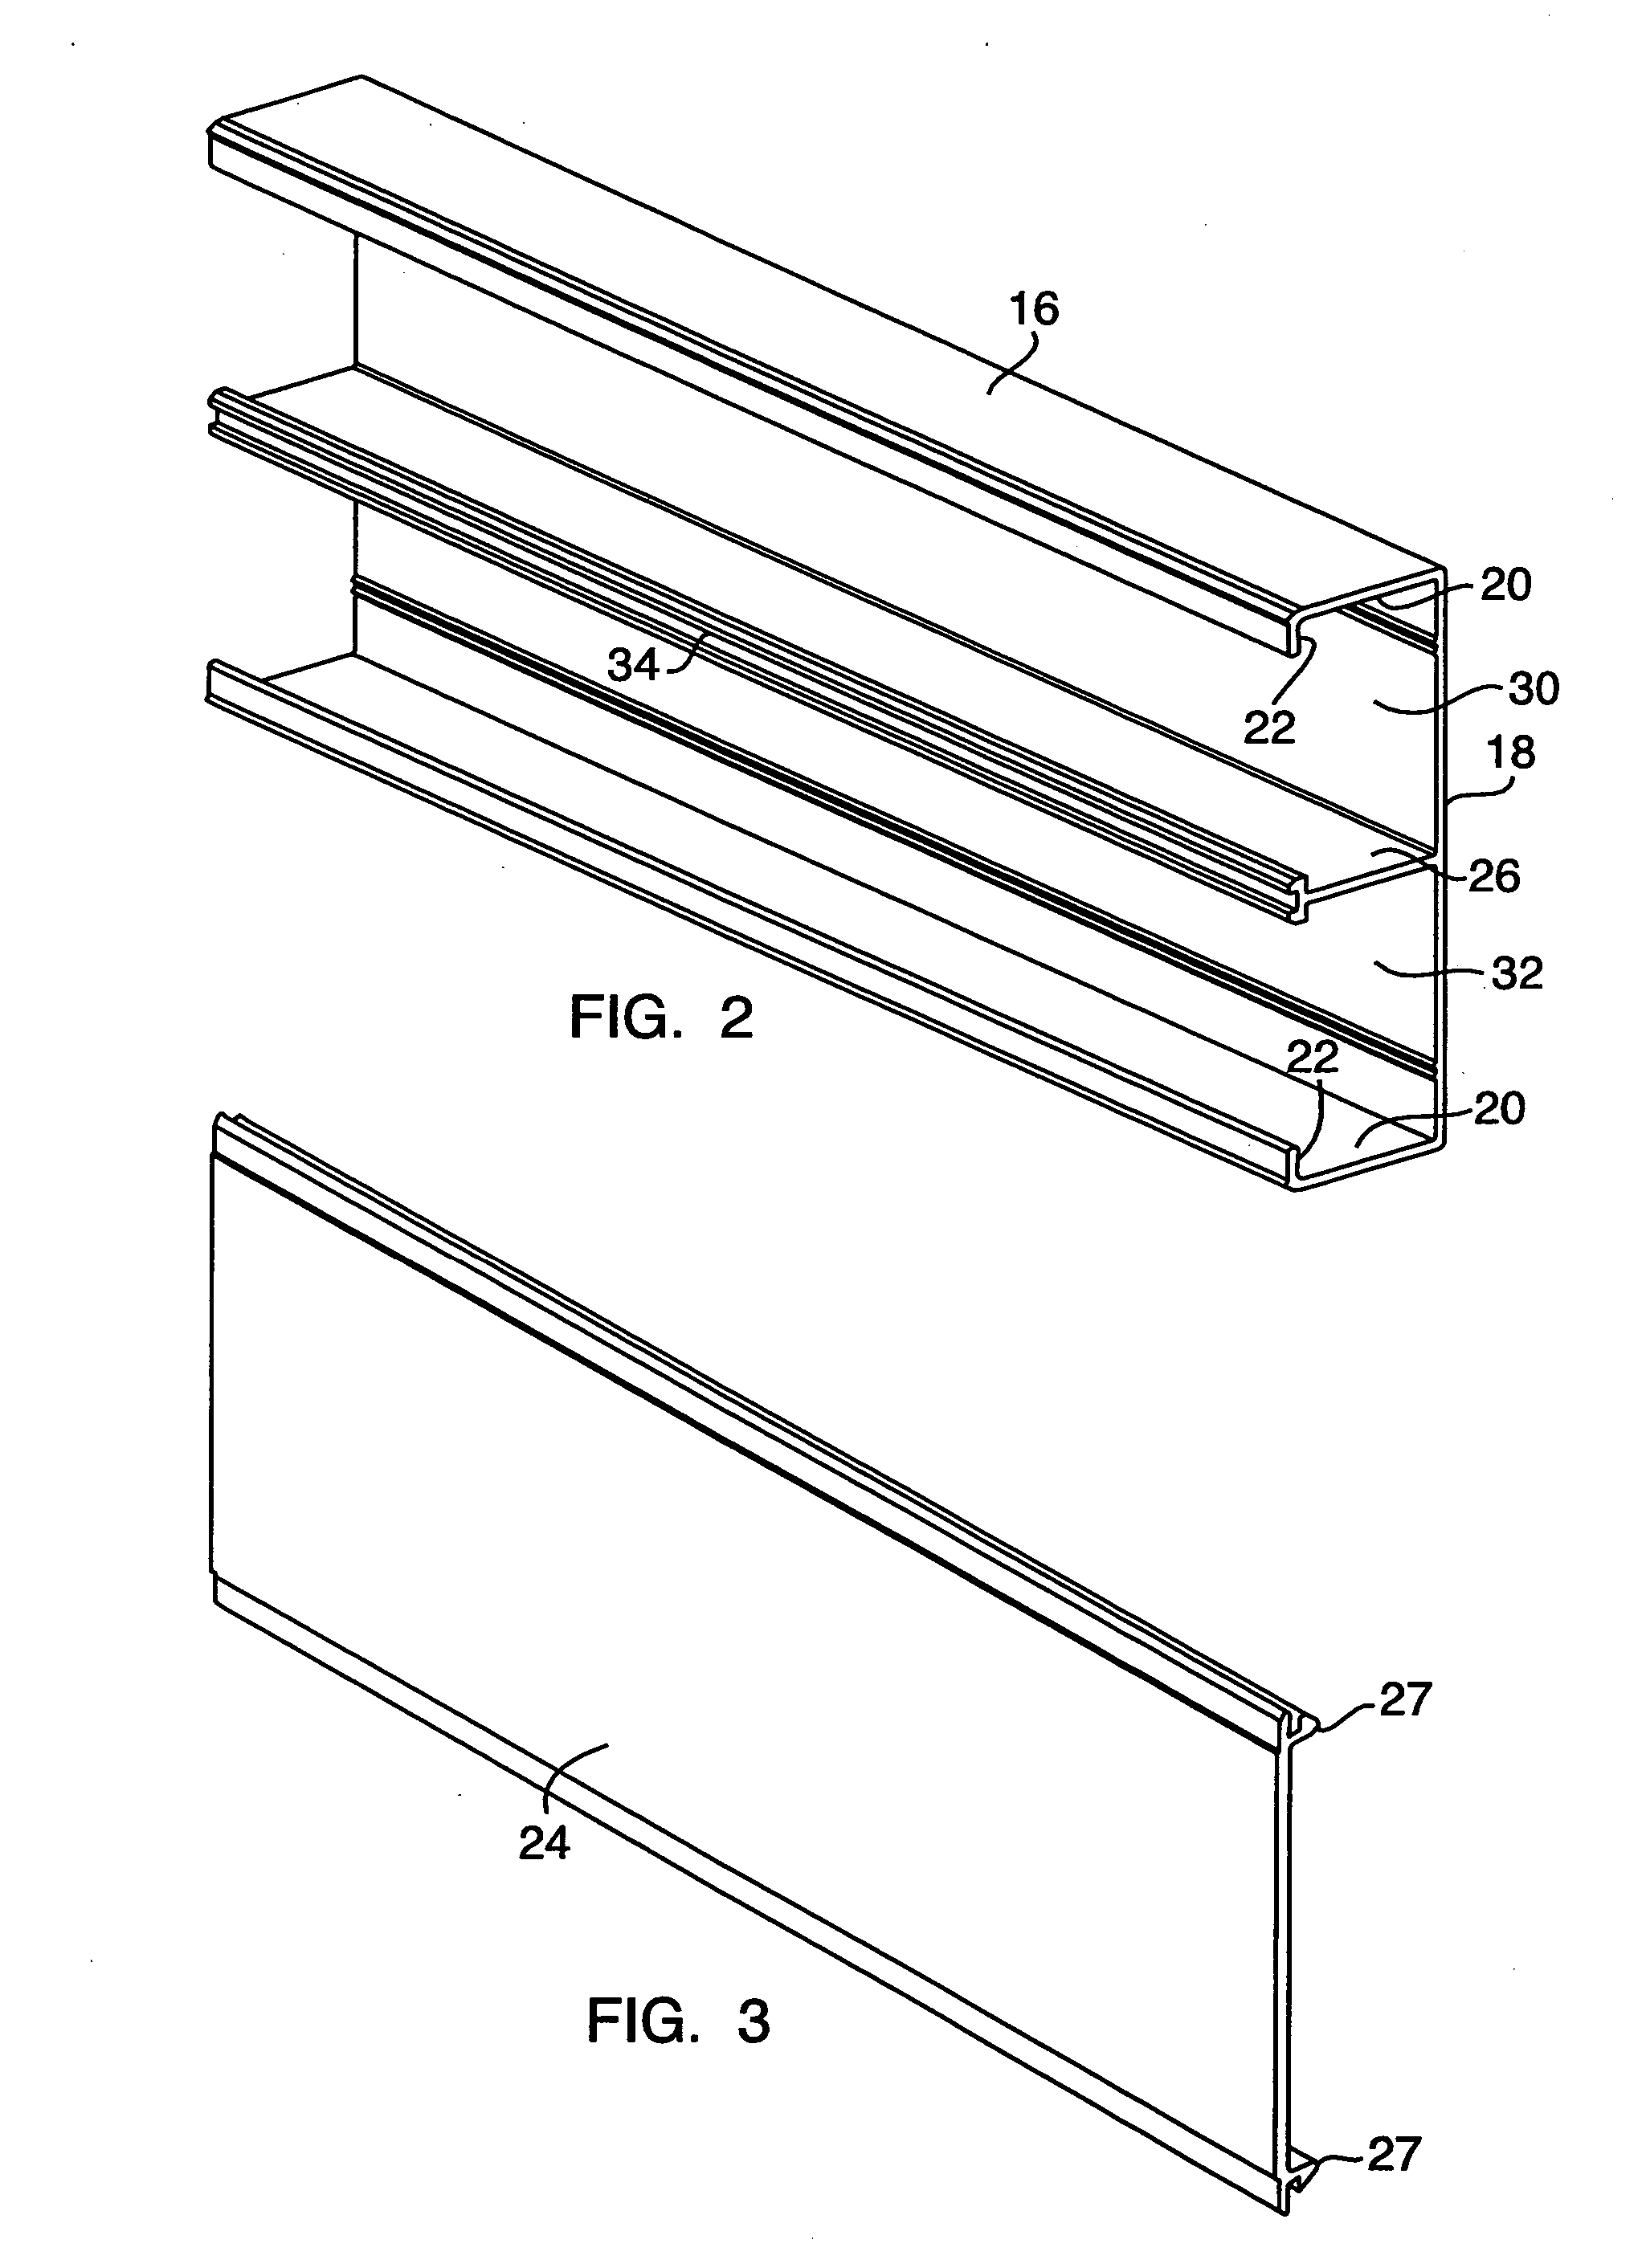 Device plate for mounting a communications device to a raceway